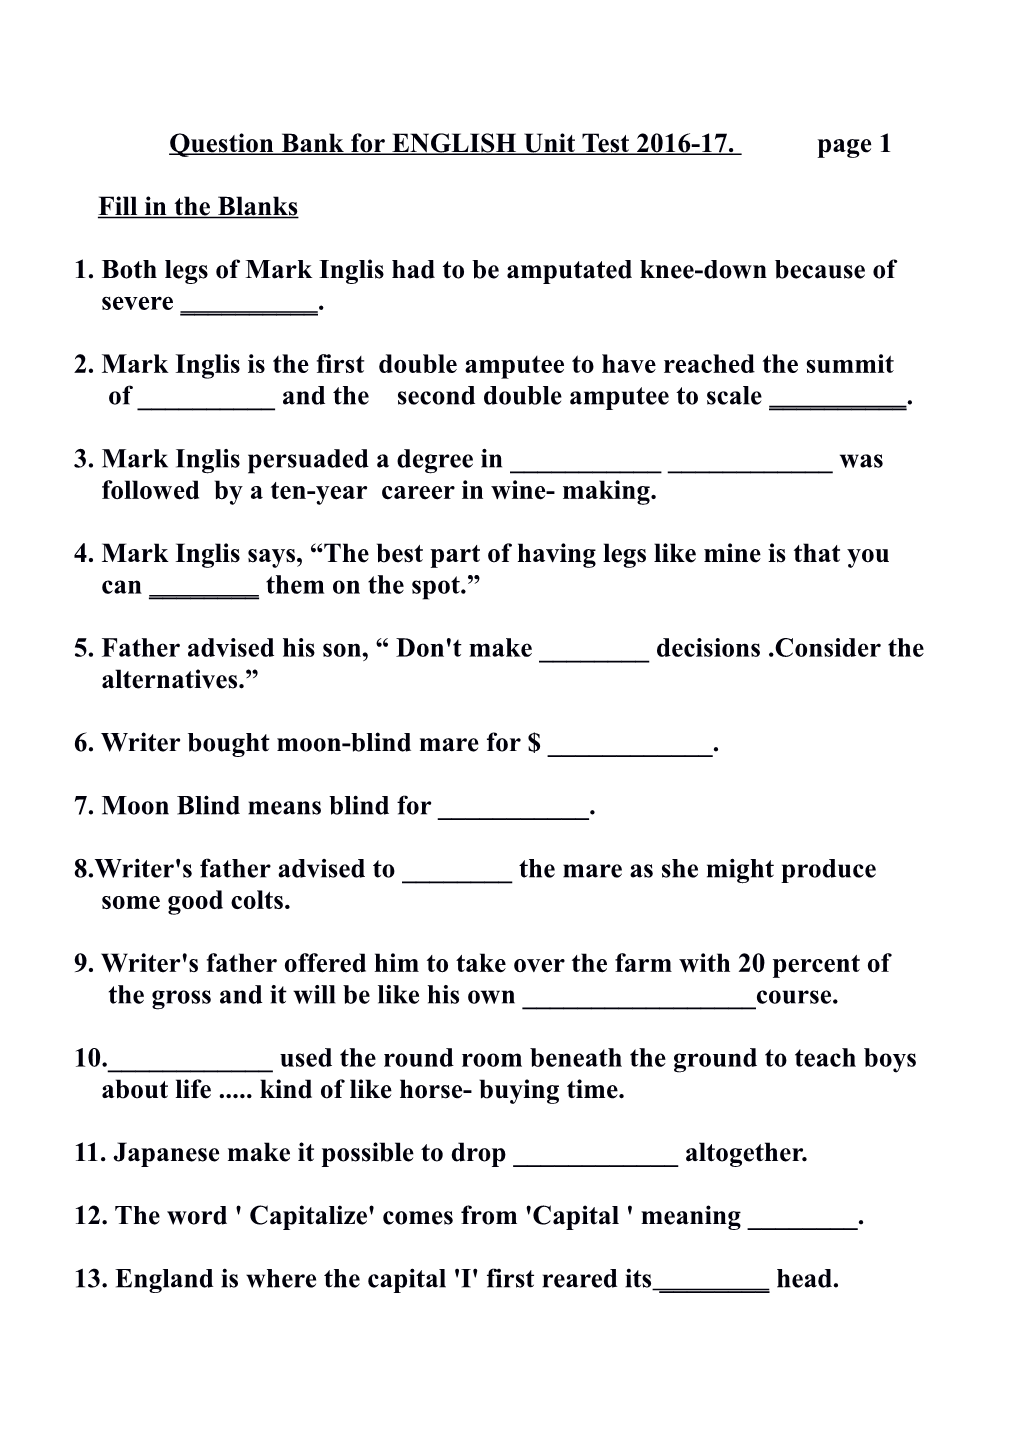 Question Bank for ENGLISH Unit Test 2016-17. Page 1